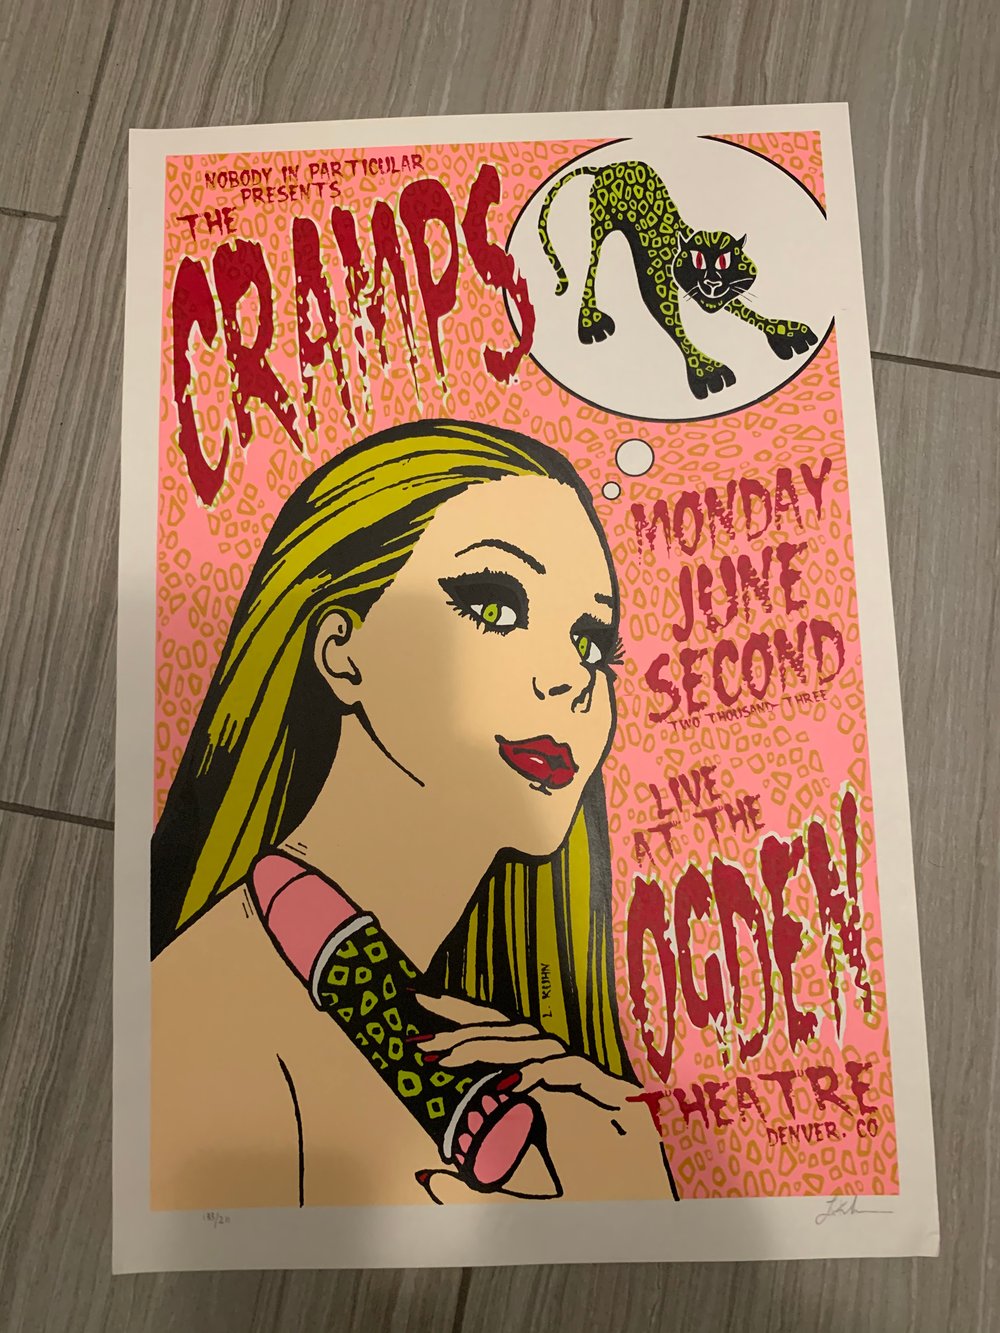 The Cramps Signed + Numbered Silkscreen Concert Poster By Lindsey Kuhn